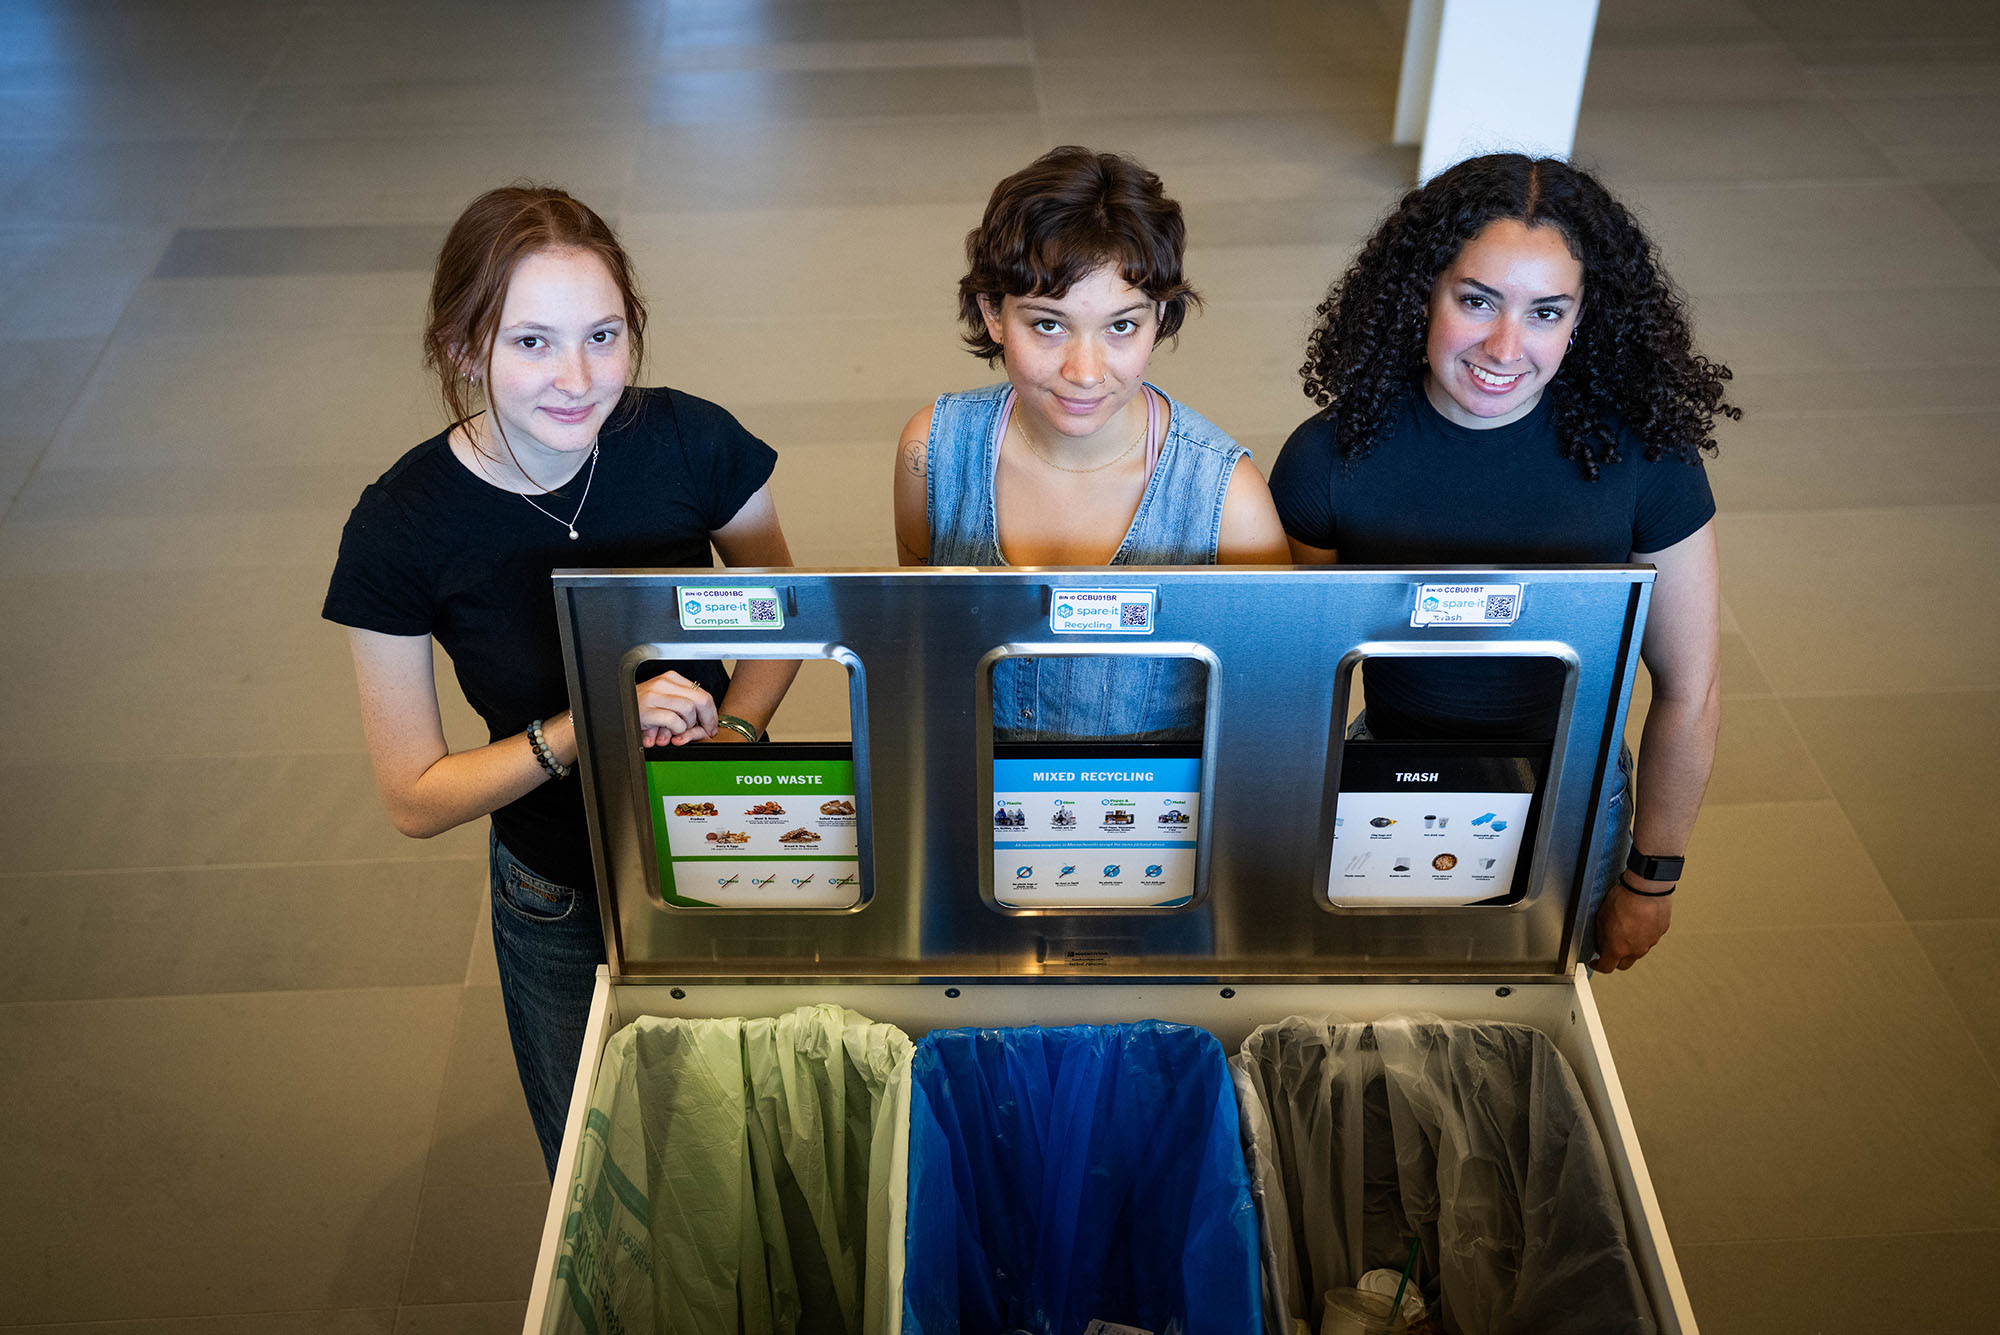 Photo: (Left to right) Tess Shotland, a woman with auburn hair and a black tshirt Cece Lagomarsino, a woman with short hair and a jean overall, and Nina Palmeon, a woman with long curly hair and a black tshirt posing with the waste disposal system at CDS.